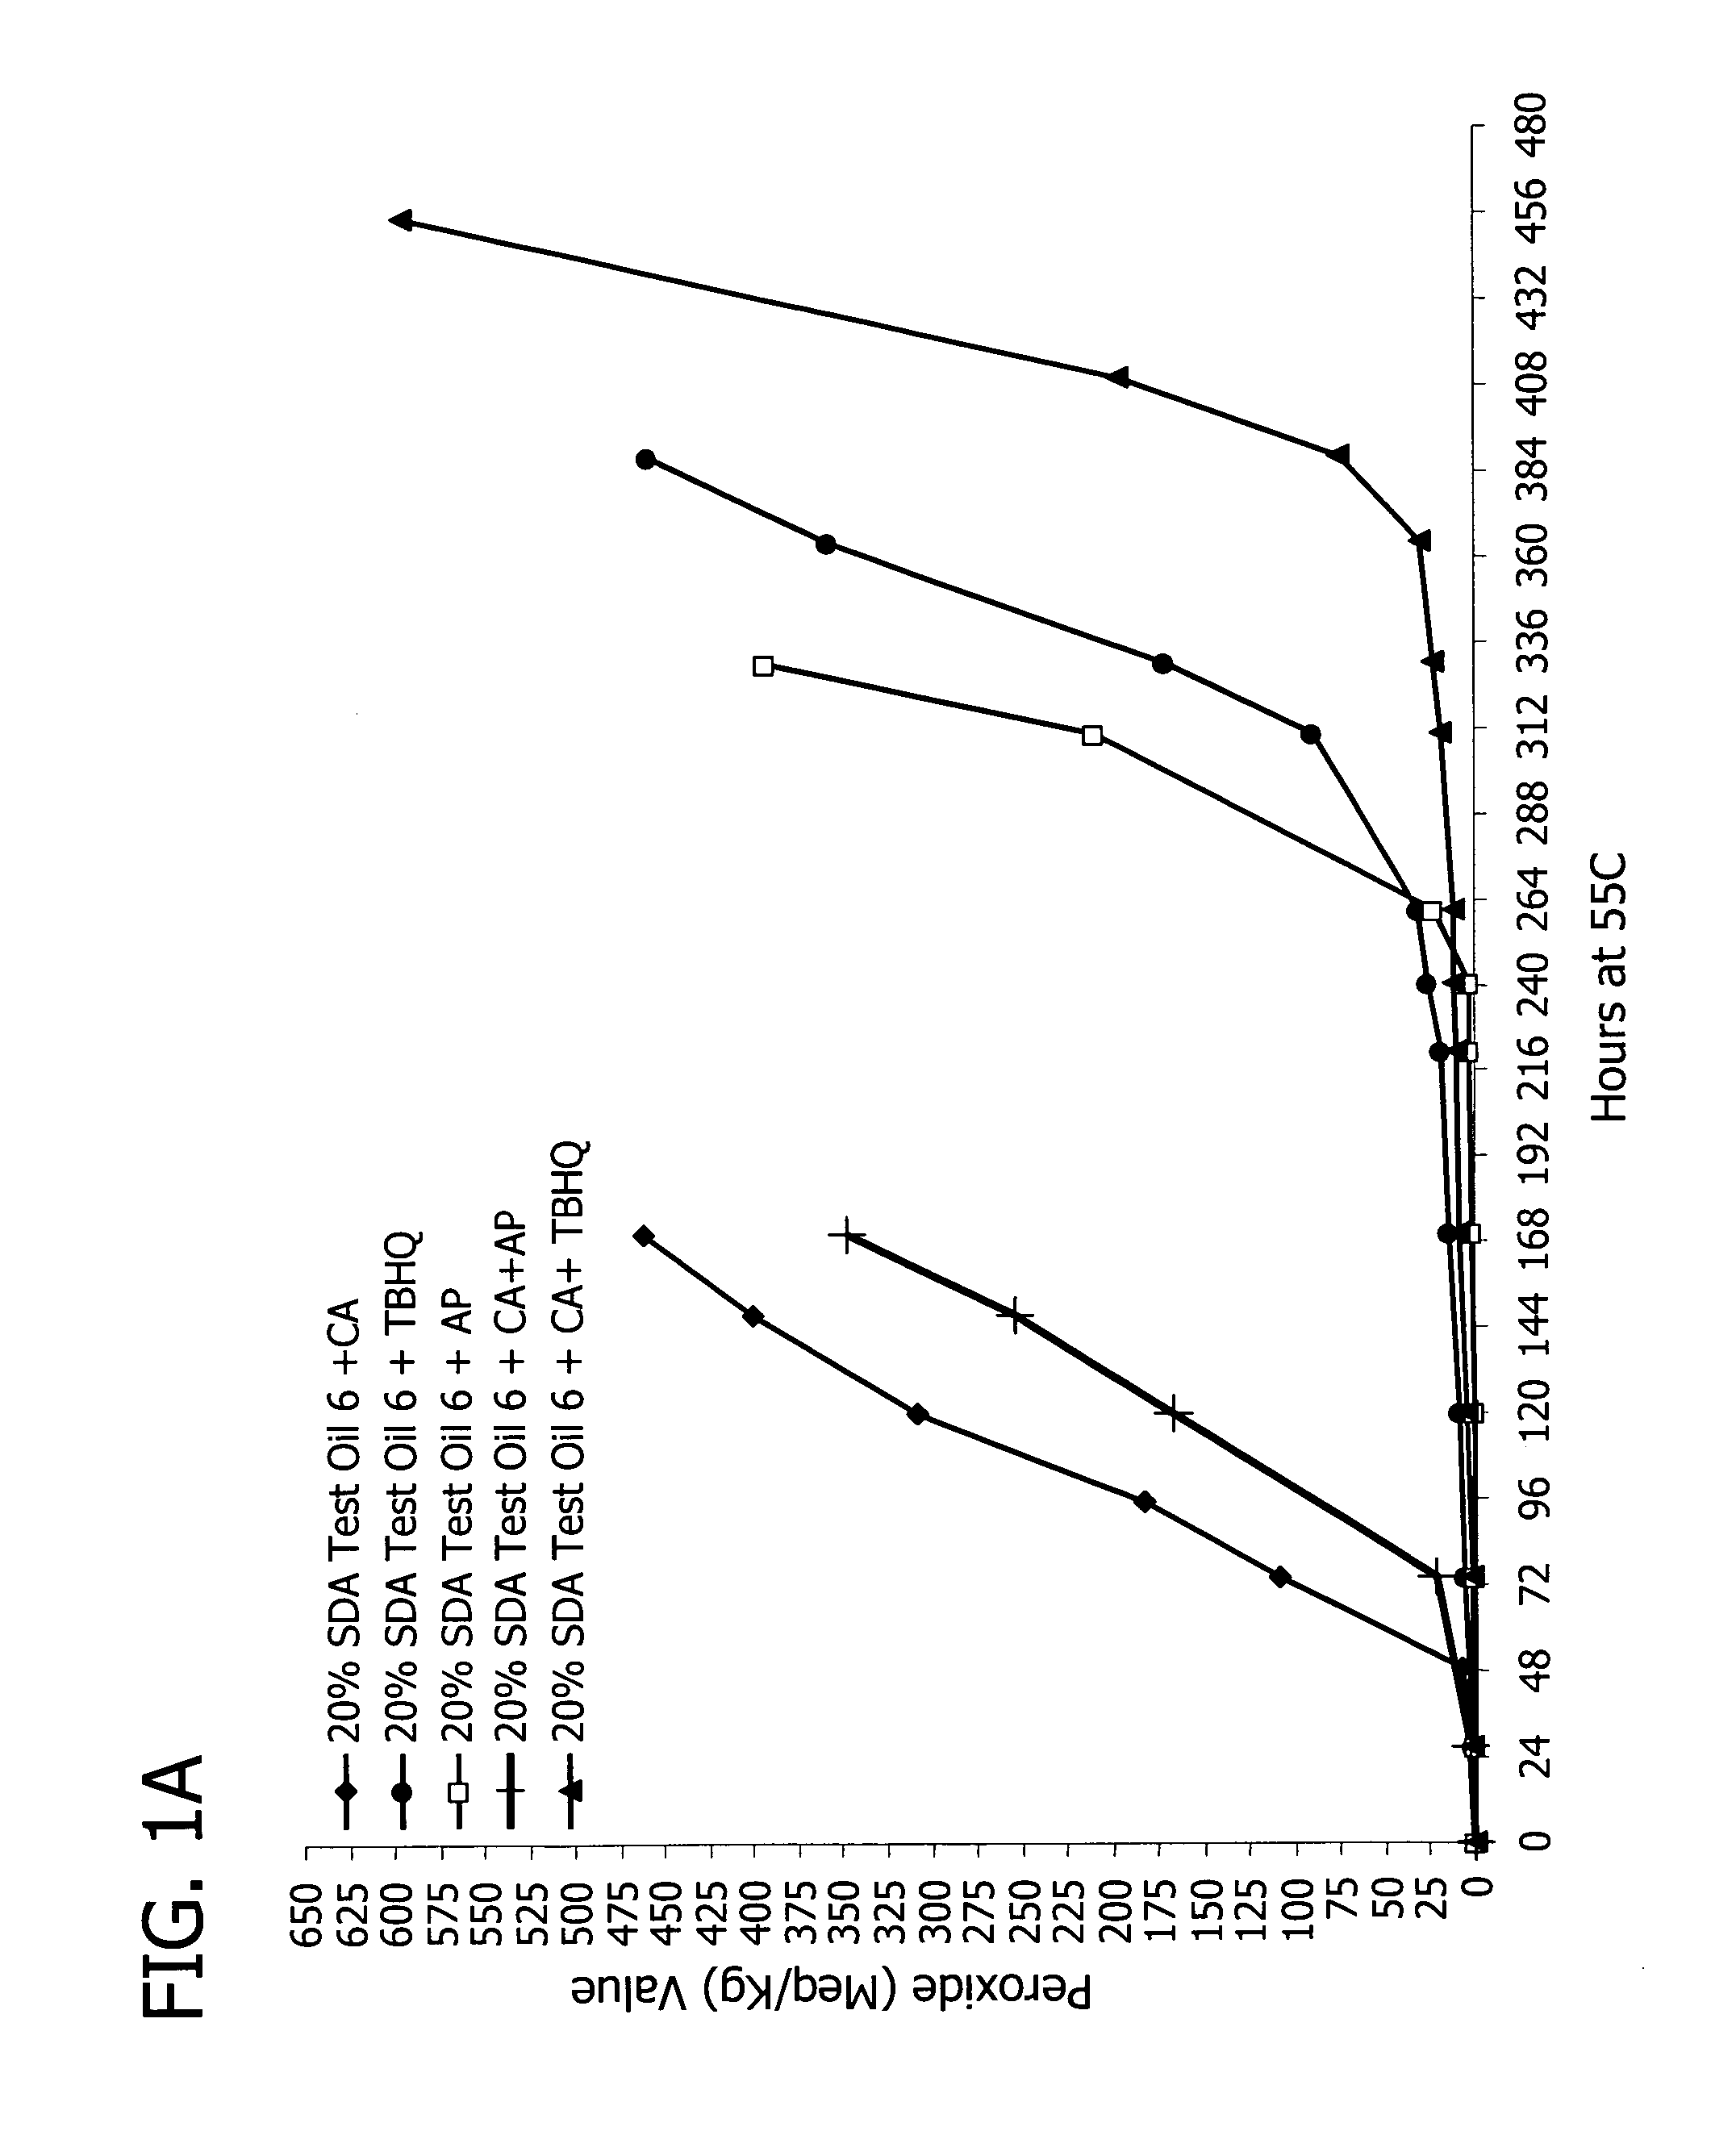 High PUFA oil compositions